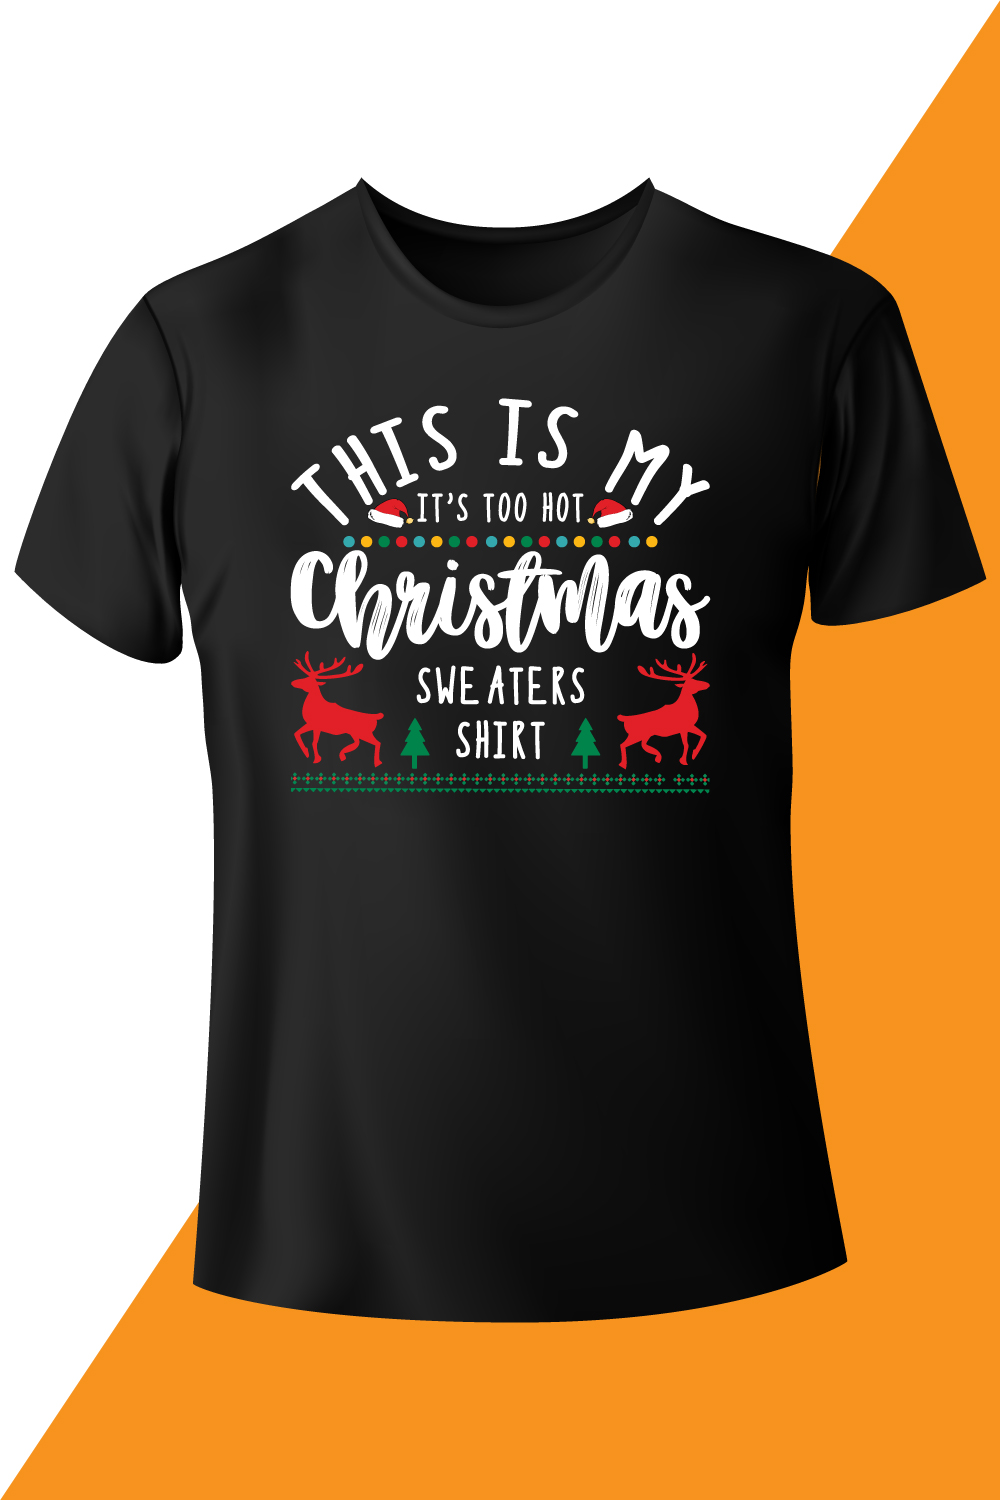 Image of a black t-shirt with an exquisite inscription this is my it's too hot christmas sweaters shirt.